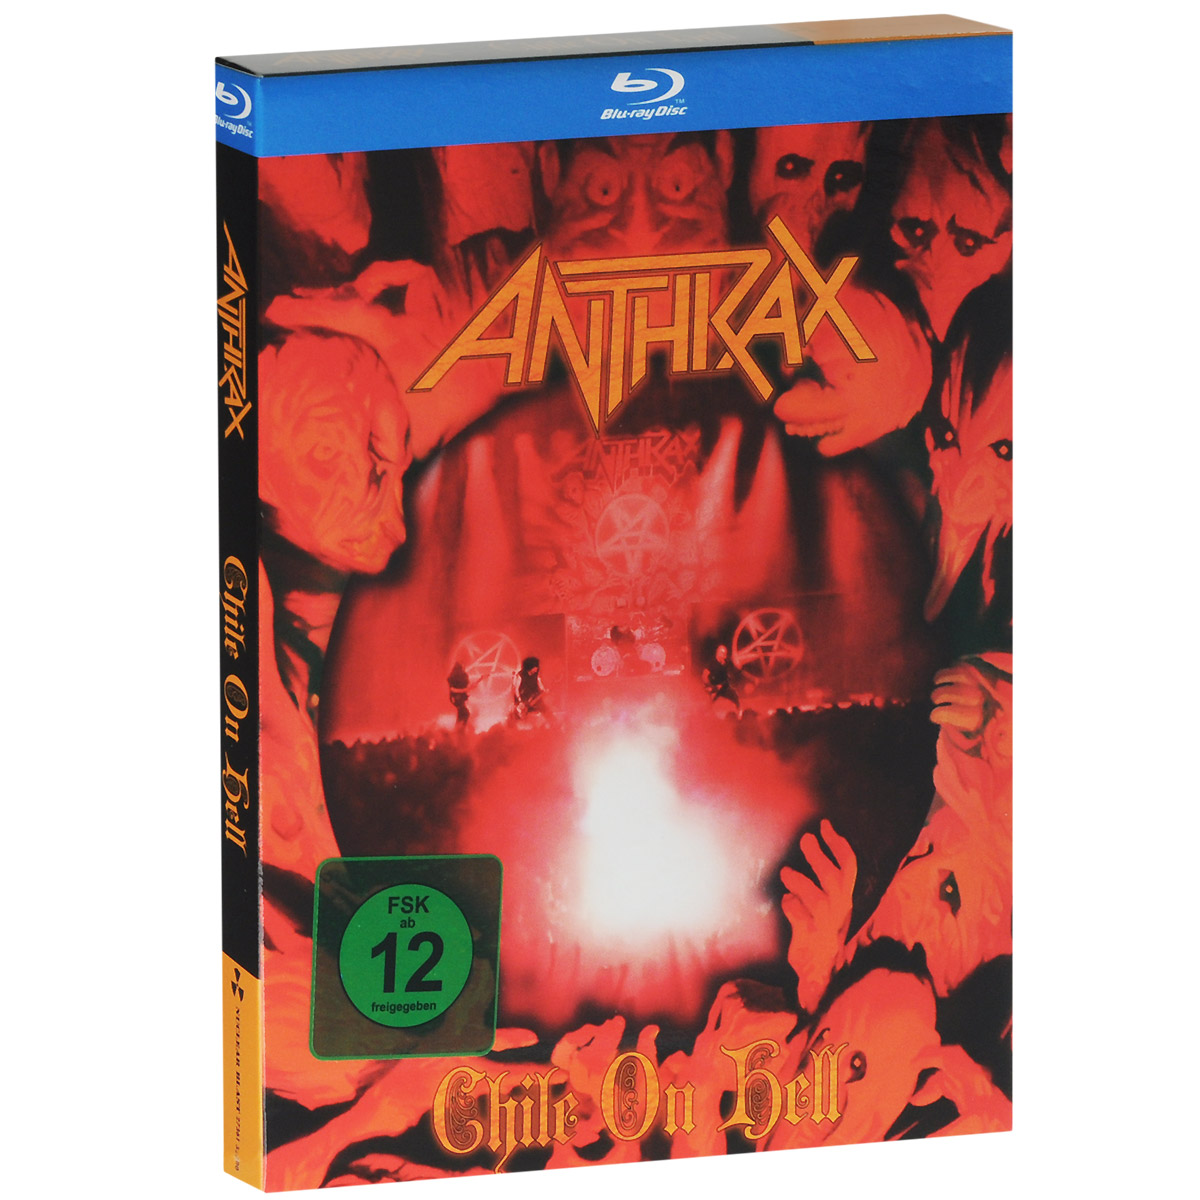 Anthrax. Chile on hell (Blu-ray + 2 CD)Track Listing: 1. Among the living 2. Caught in a mosh 3. I am the law 4. Chile on hell 5. Efilgnikcufecin (N.F.L.) 6. A skeleton in the closet 7. March of the S.O.D. 8. 30 years of Anthrax 9. In the end 10. T.N.T. 11. Im alive 12. Indians 13. Metal Masters 14. Medusa 15. In my world 16. Fight em til you cant 17. The scene 18. Im the man 19. Madhouse 20. Antisocial 21. Credits sequence 22. Righteous scheduling